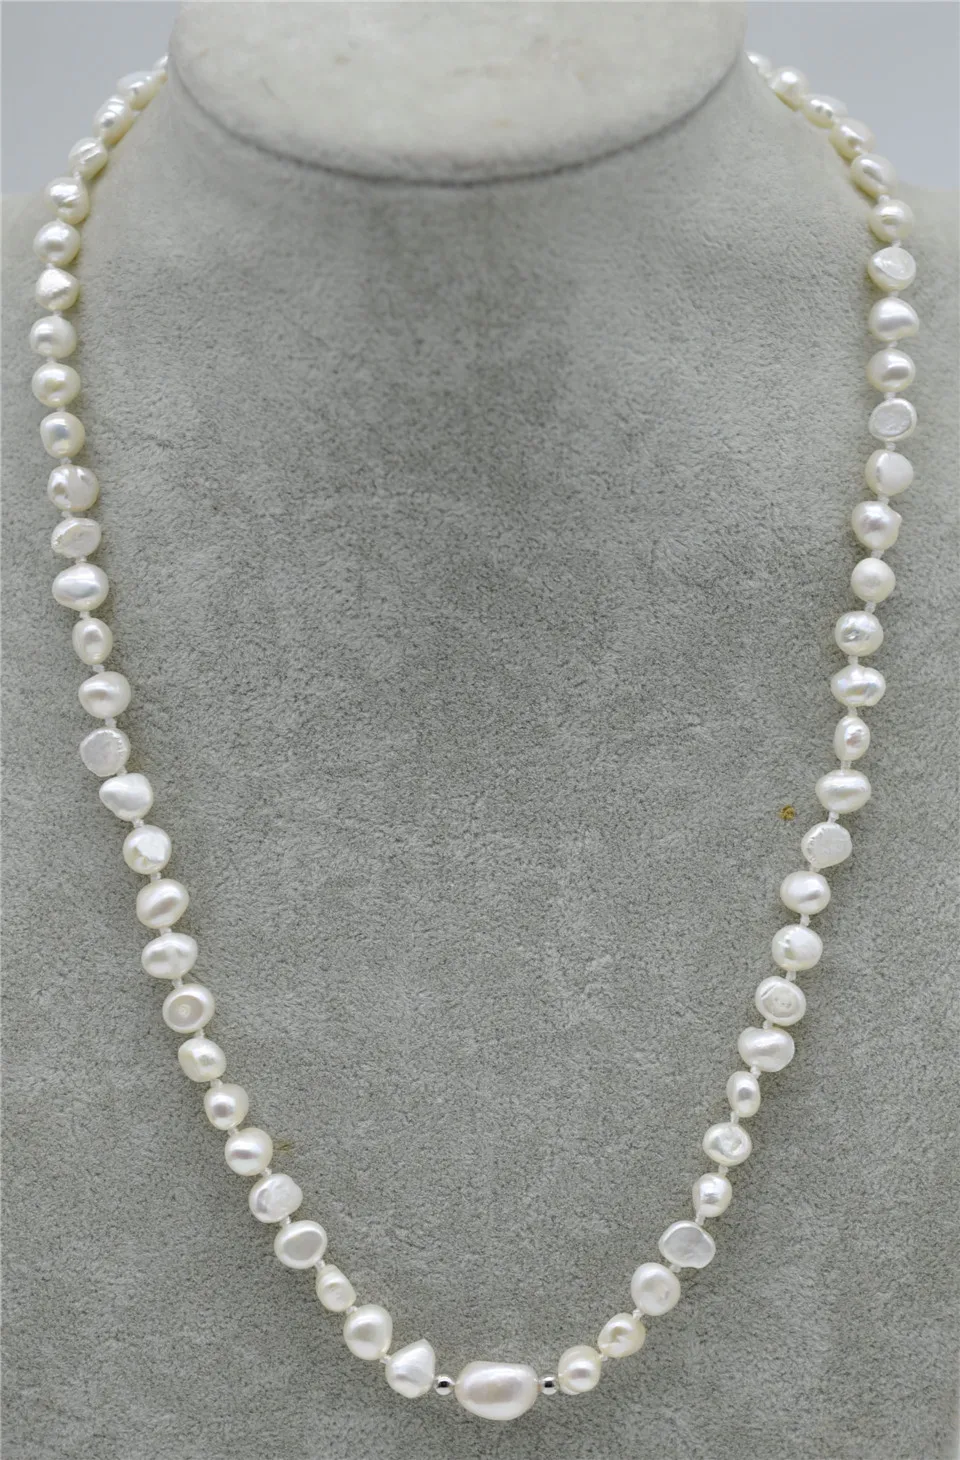 

HABITOO Real Freshwater Pearl 7-8mm White Handmade Necklace Jewelry Chains Necklace for Woman жемчужное ожерелье